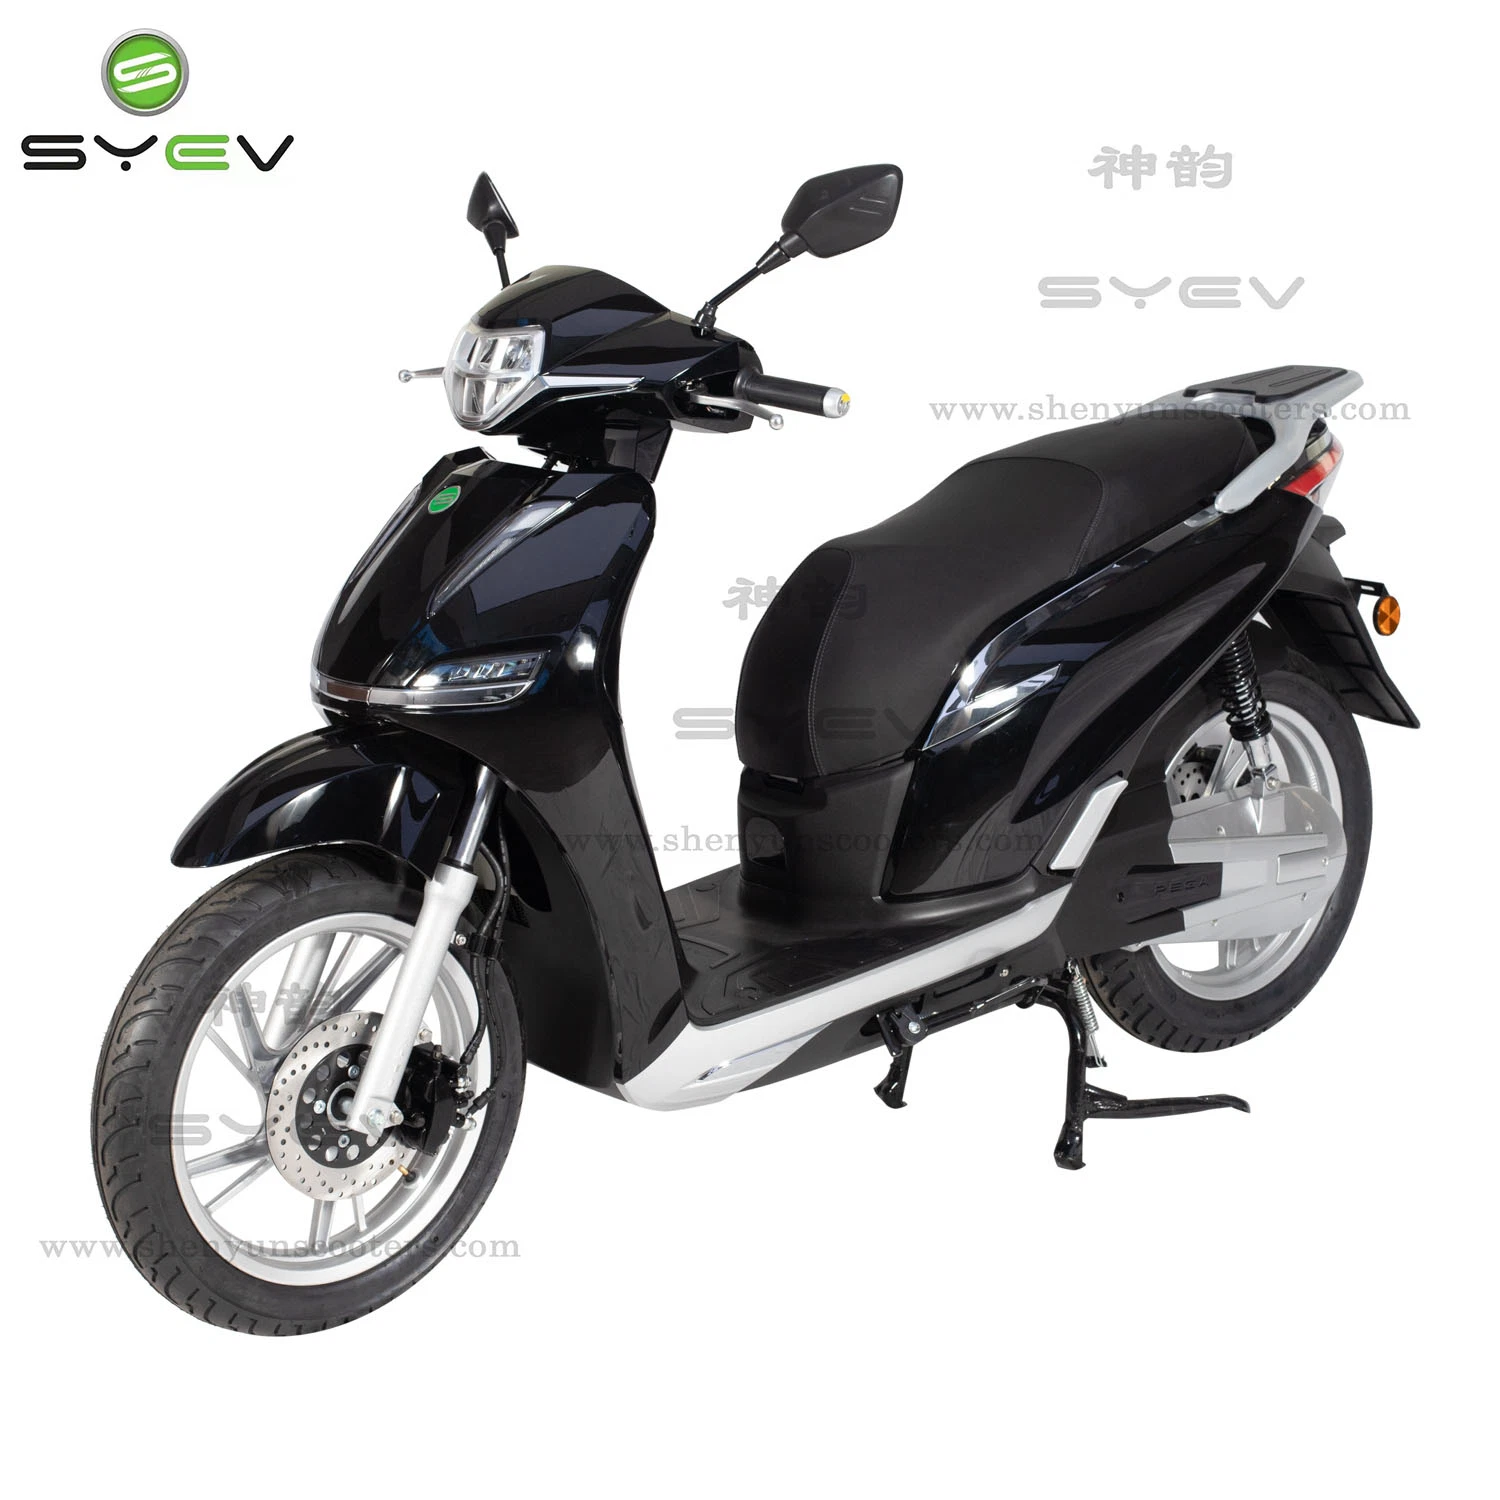 Shenyun 2022 High quality/High cost performance  Two 2 Wheel Electric Scooter Motorbike 3000W Central Motor 80km/H for Adults Electric Motorcycle Bike